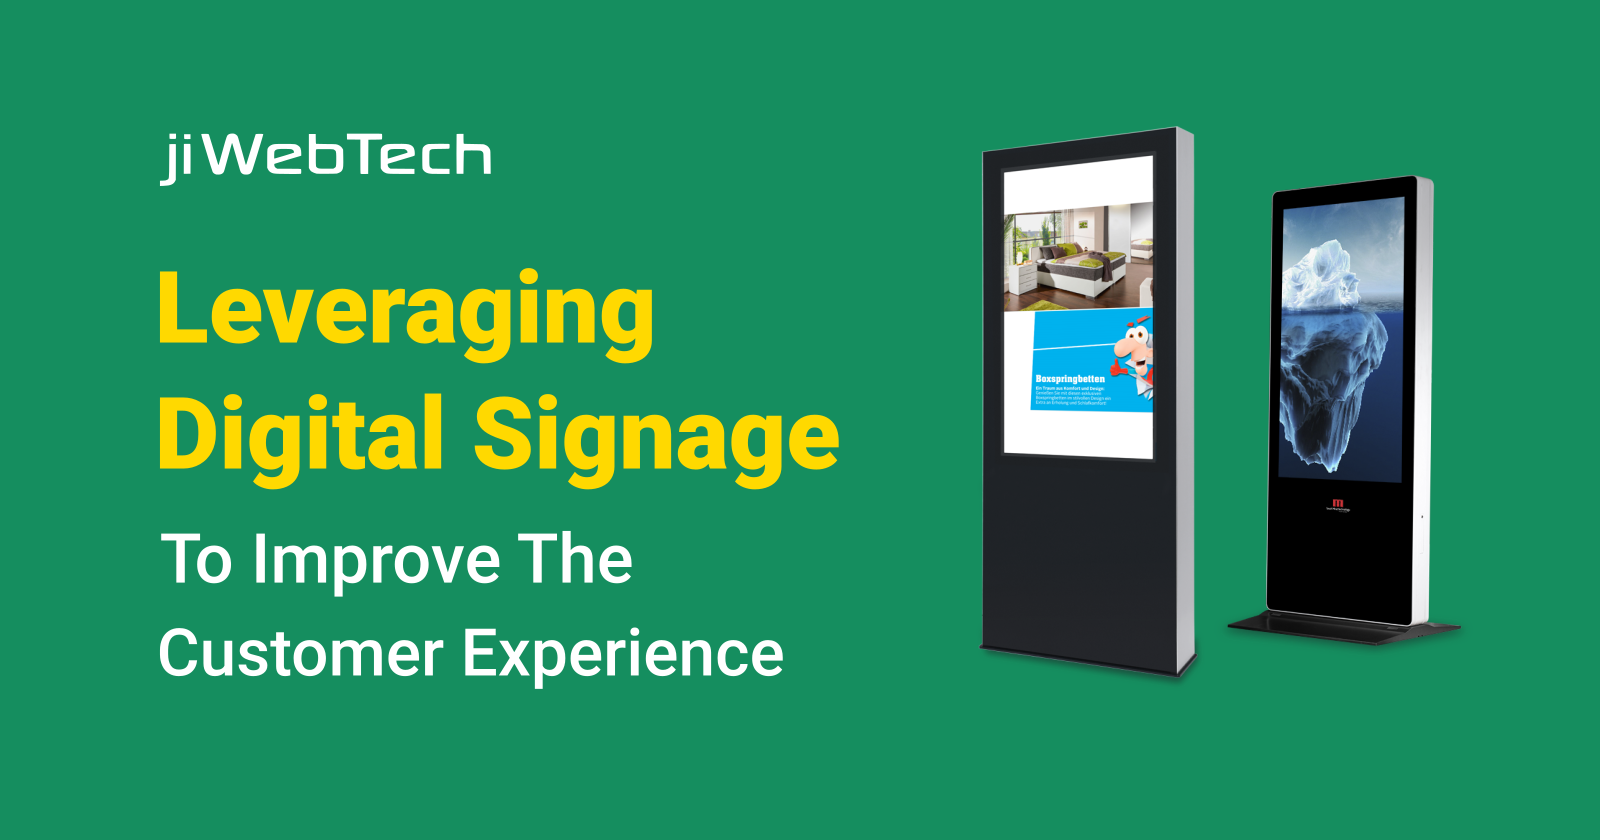 How does the Digital Signage help to Improve Customer Experience for Hotels?